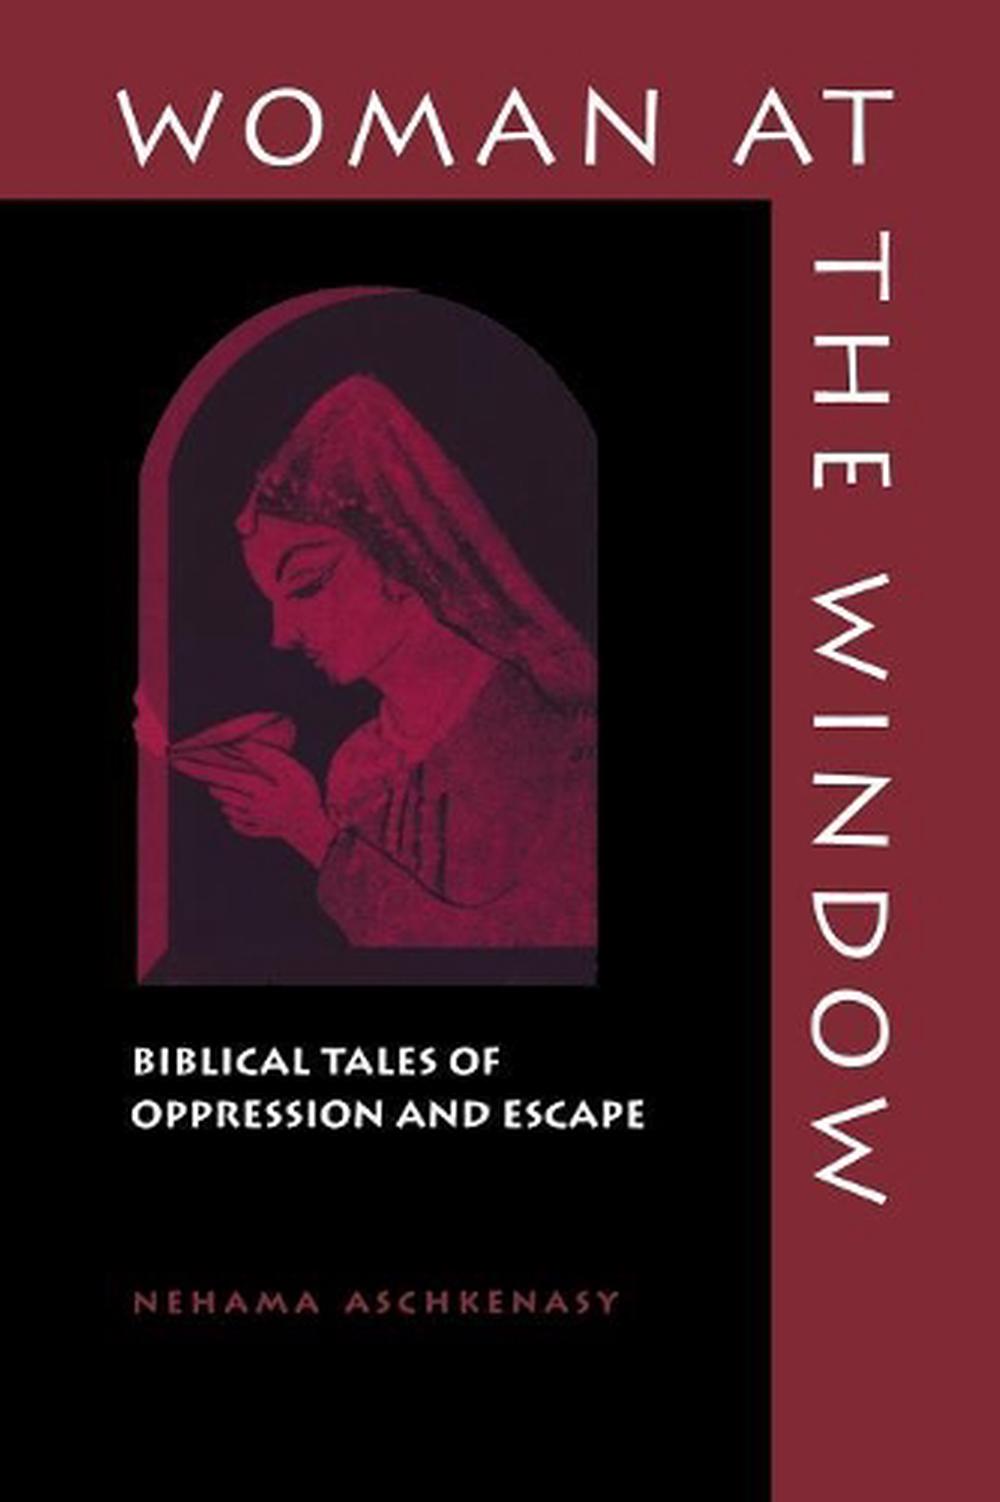 Woman at the Window Biblical Tales of Oppression and Escape by Nehama